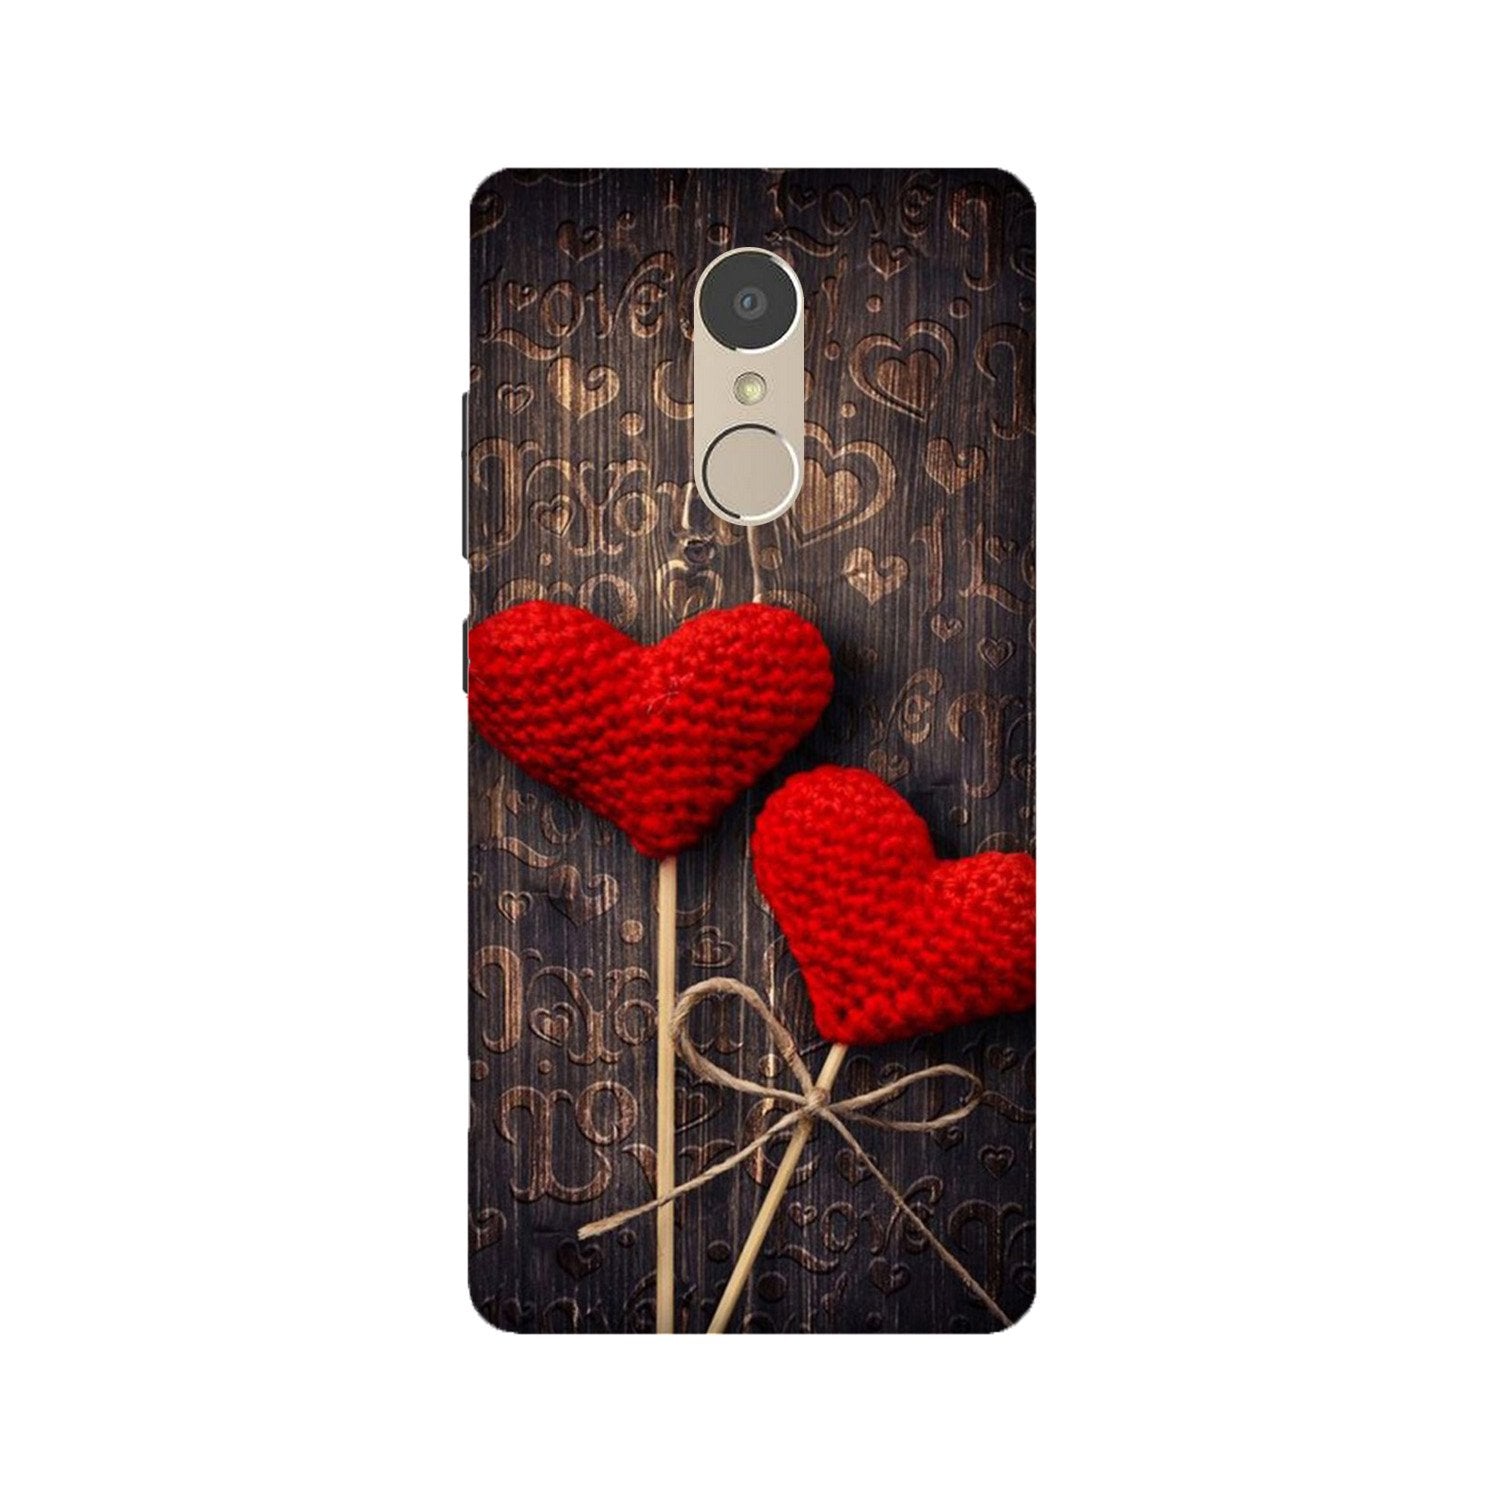 Red Hearts Case for Lenovo K6 Note